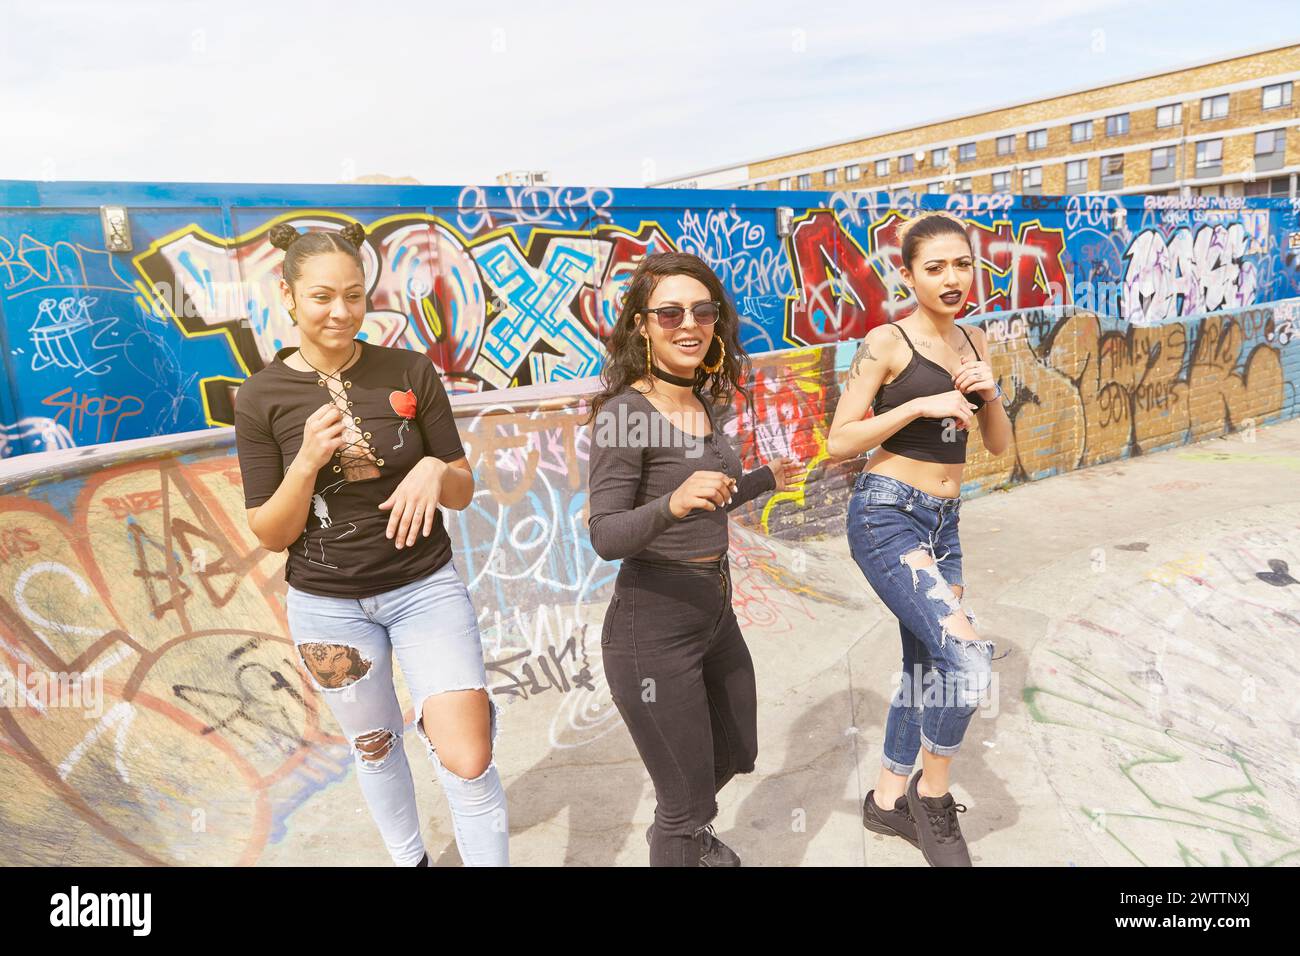 Three women posing in front of a graffiti wall Stock Photo